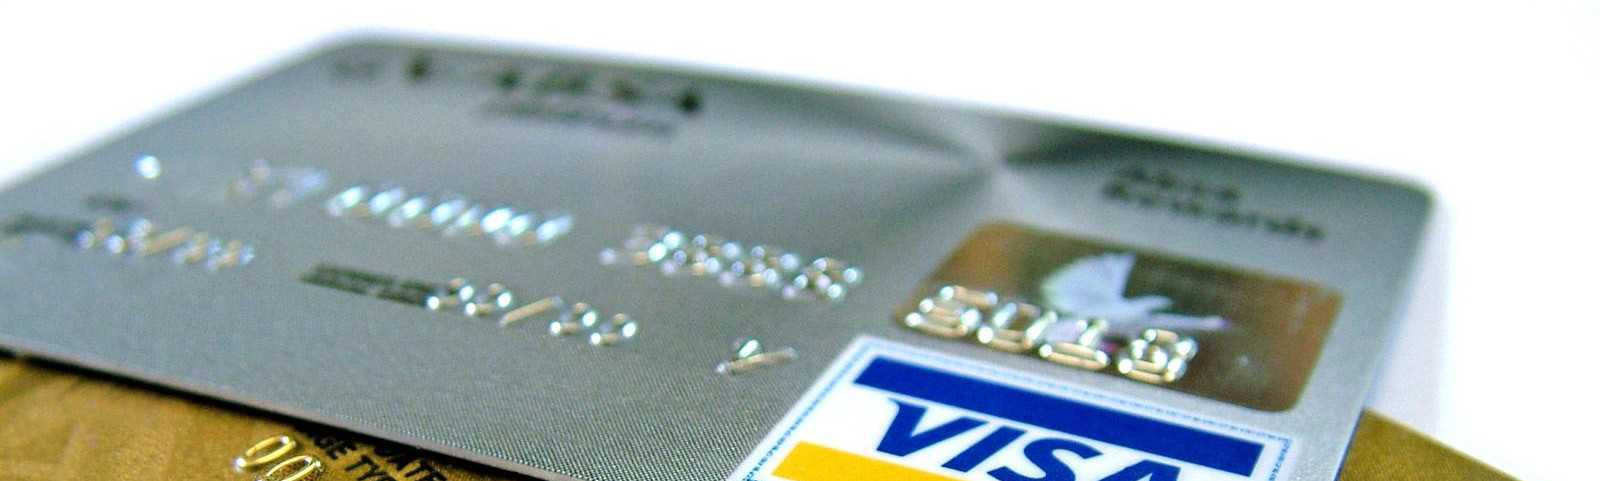 Blurry close-up photo of credit cards